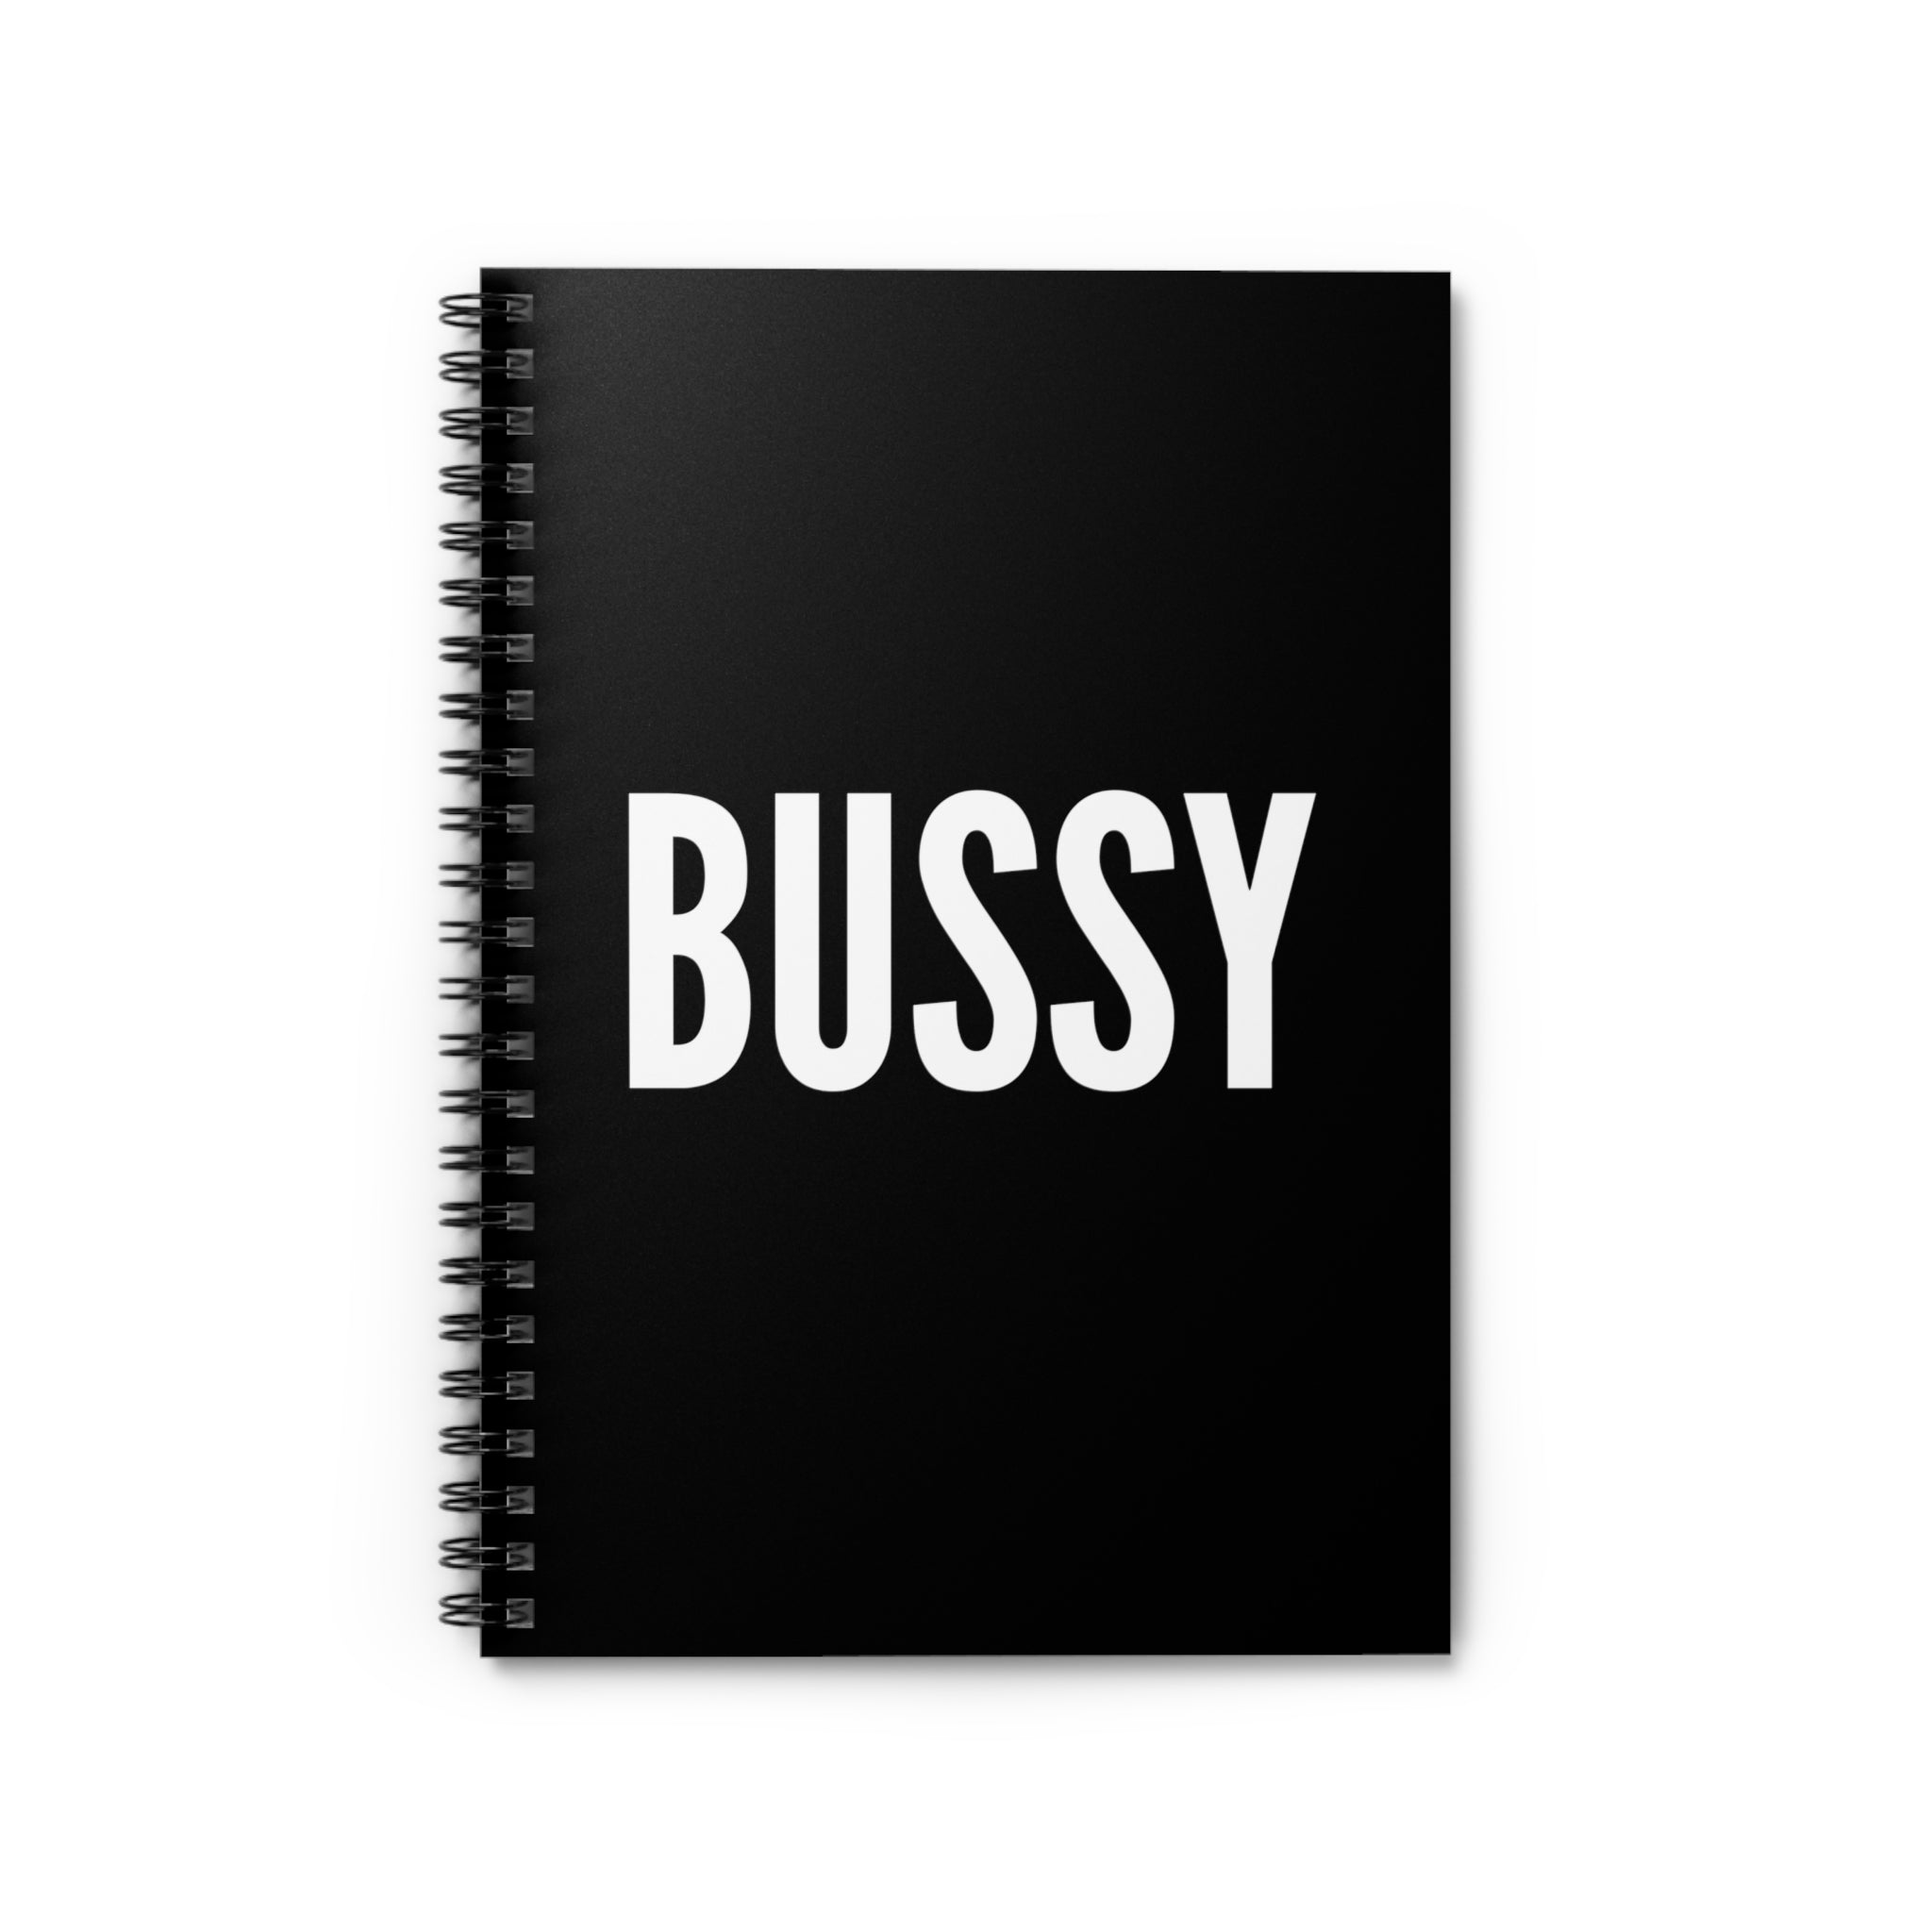 Bussy  | Spiral Notebook - Ruled Line